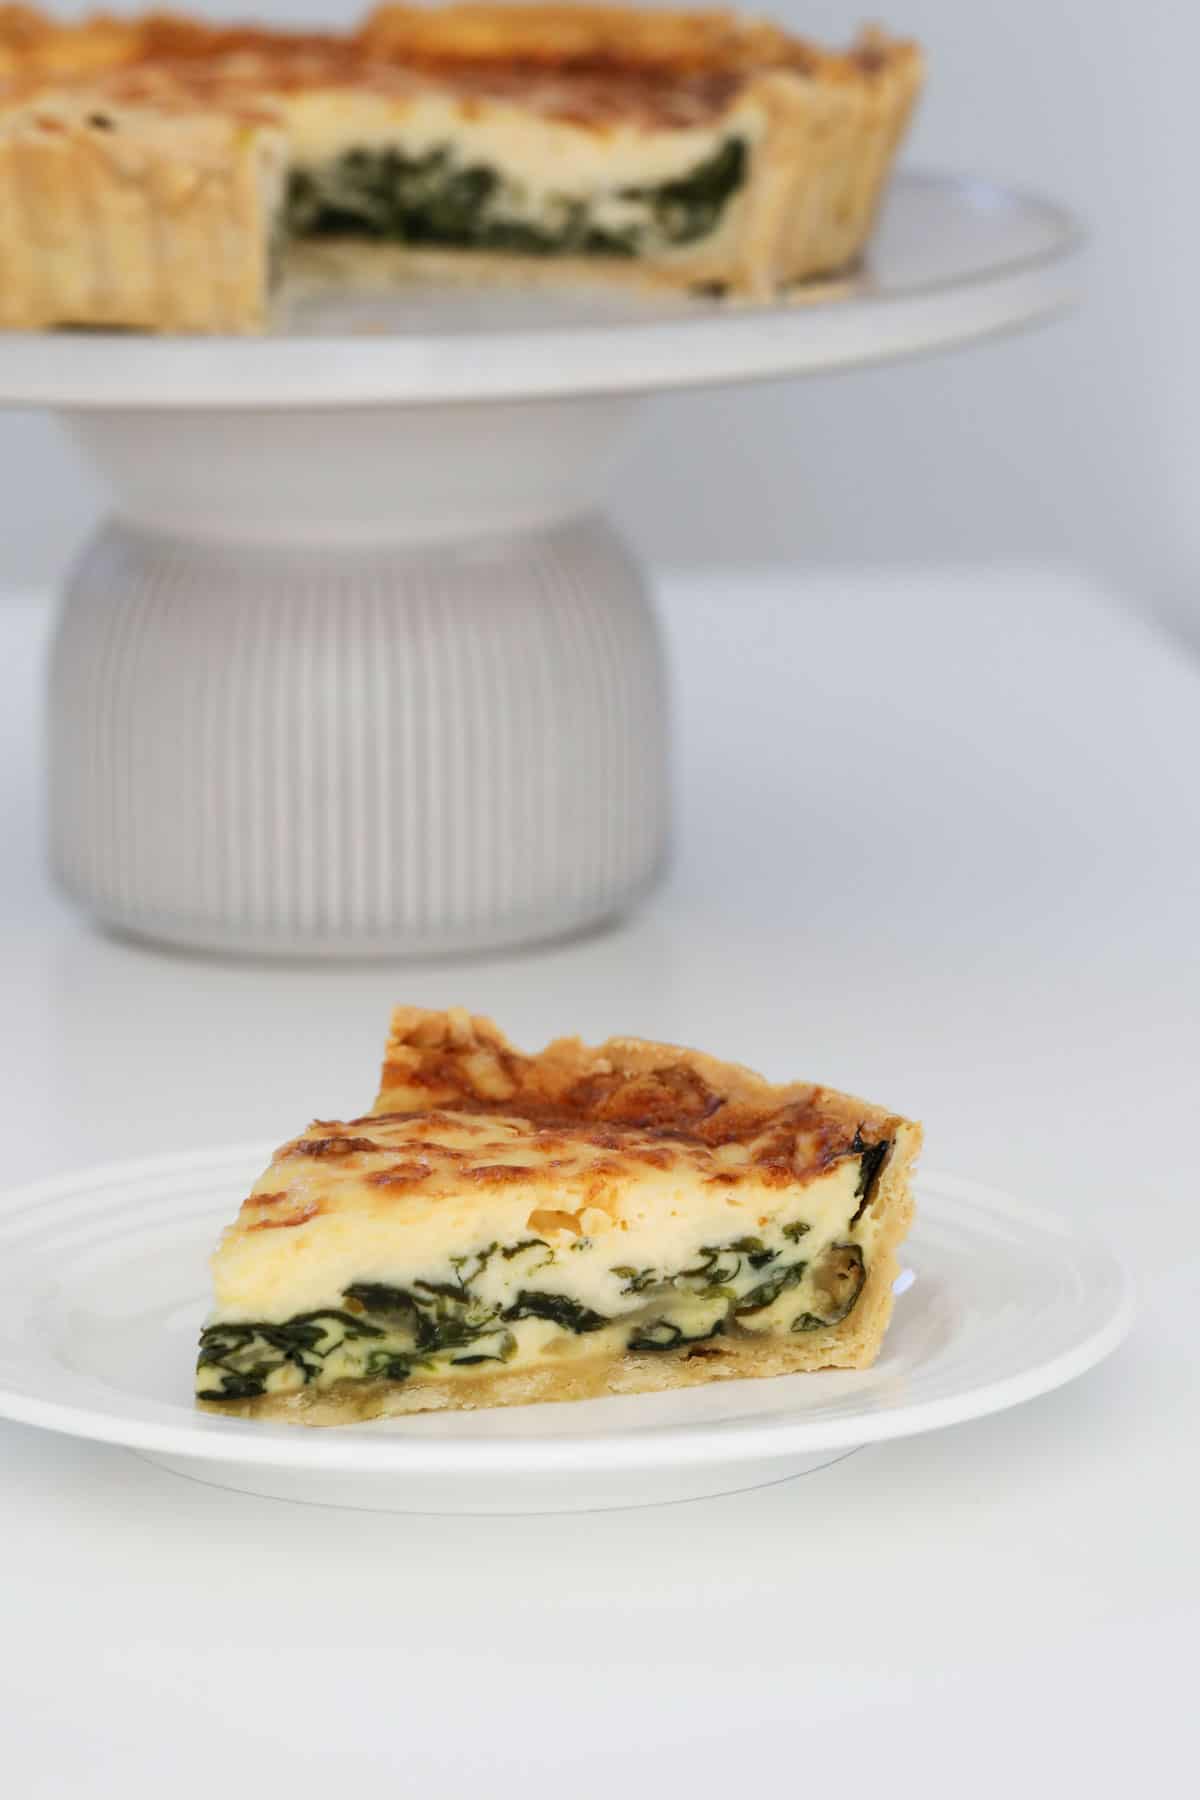 A wedge of florentine quiche served on a plate.